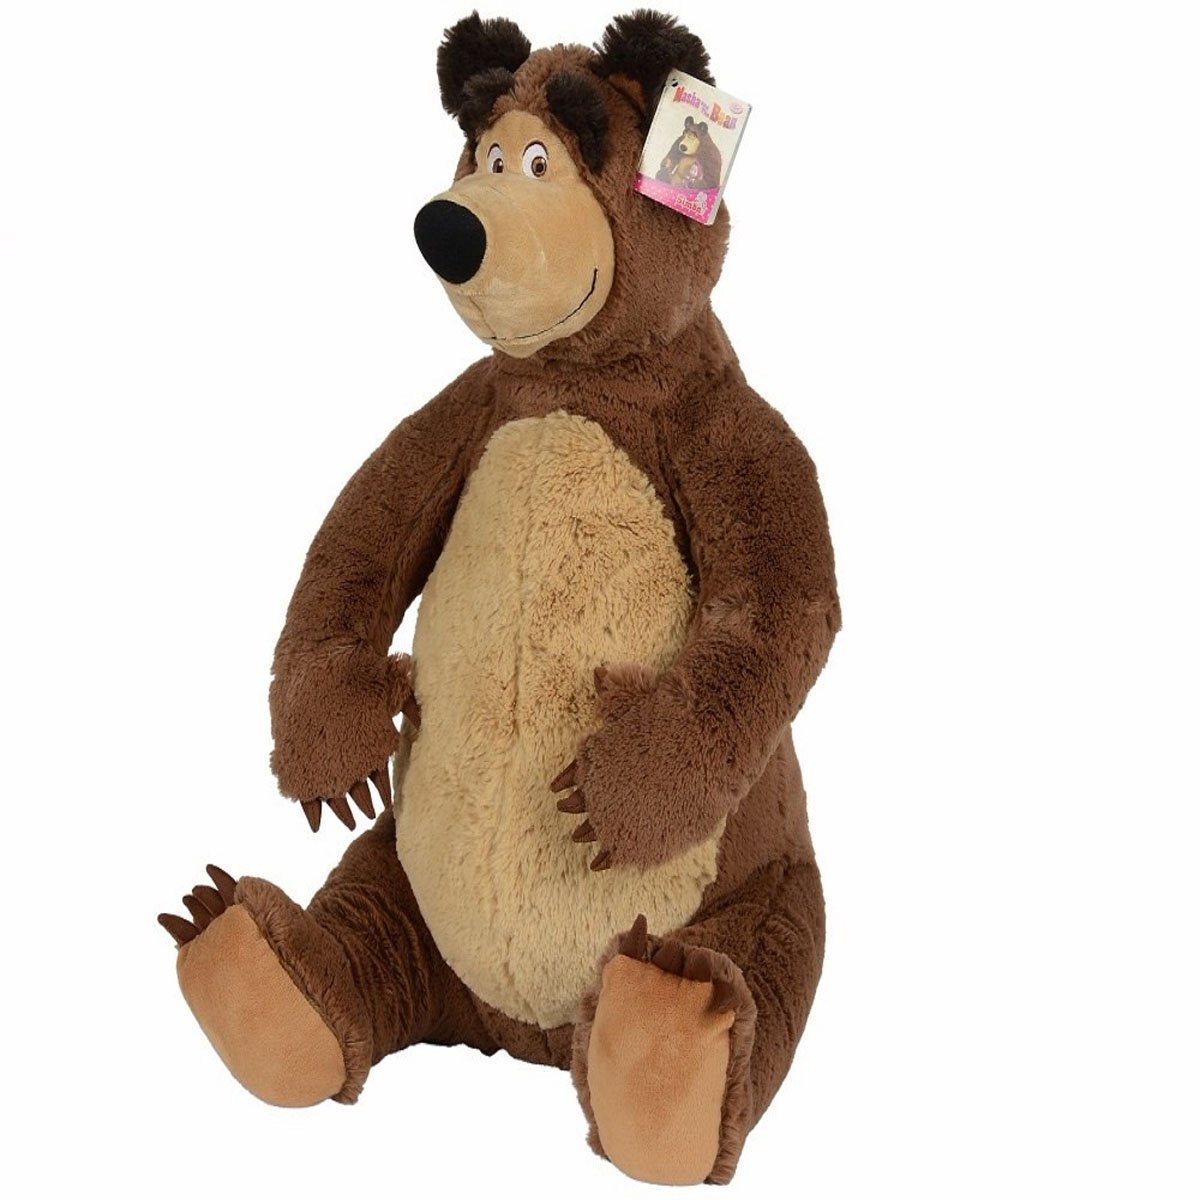 Peluche Oso Gigante Masha And The Bear Spin Master